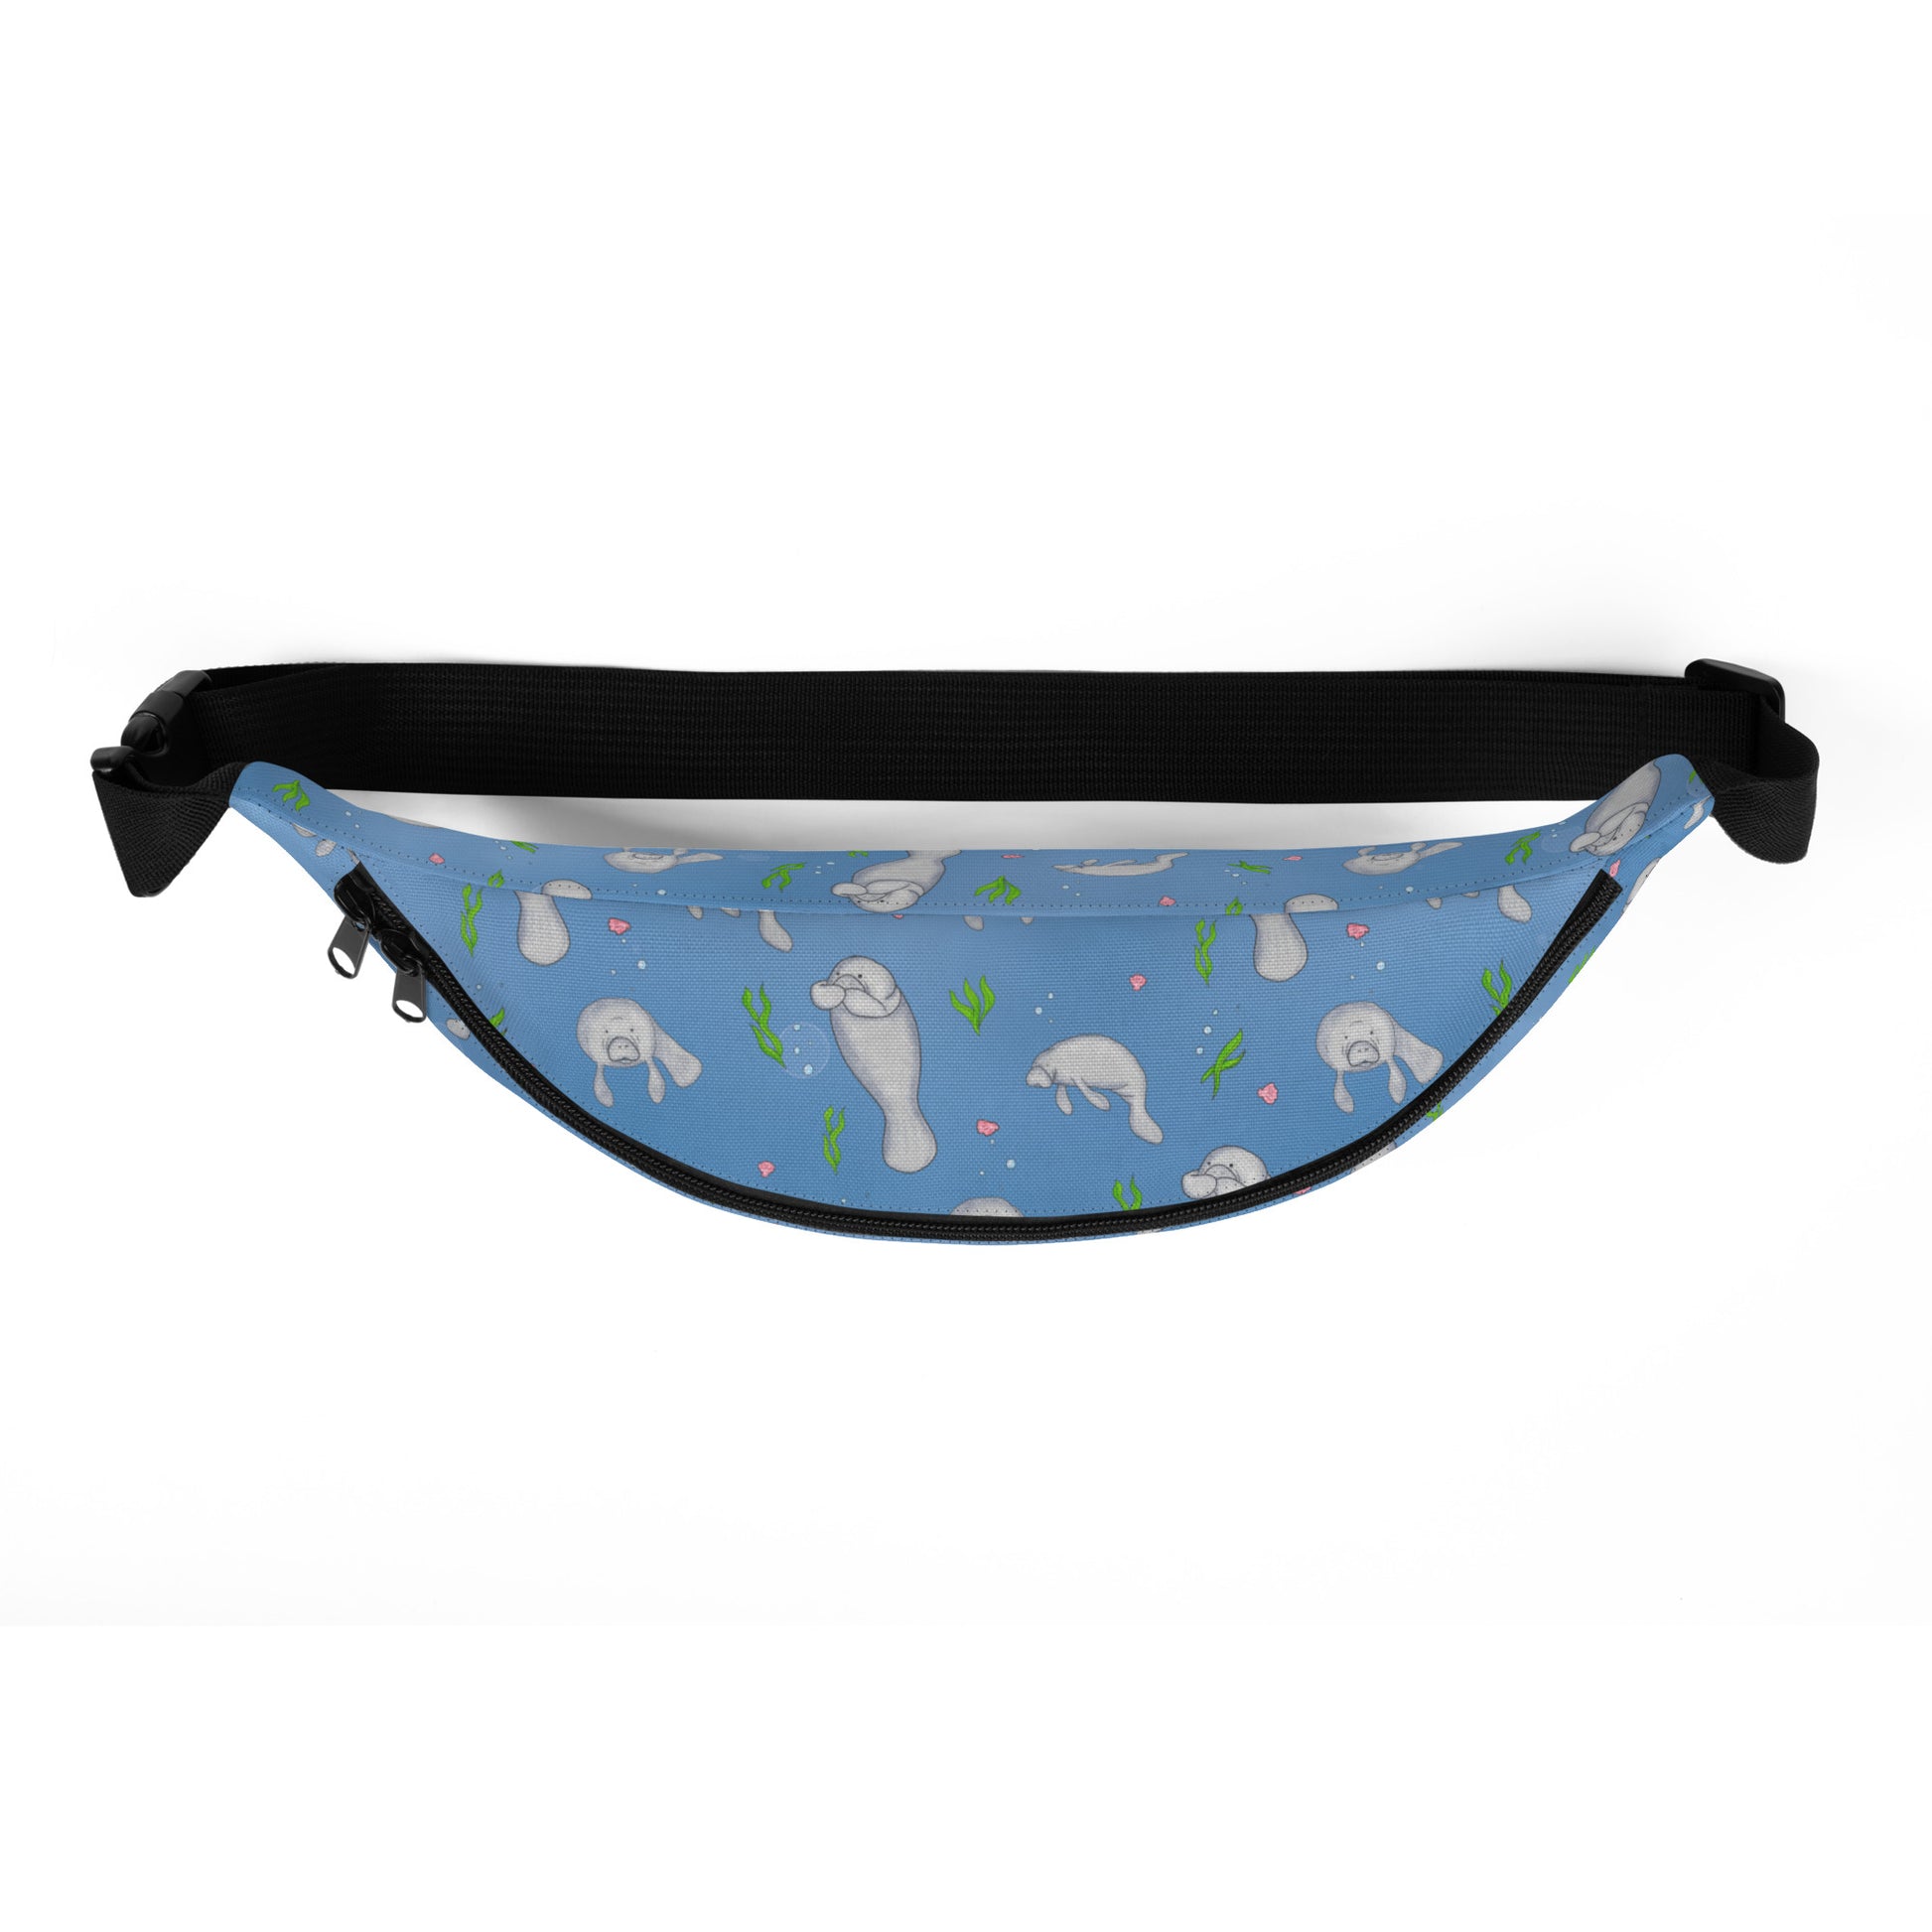 Cute manatee patterned belt bag with adjustable straps, zippered pouch, and small inner pocket. Top view of bag.